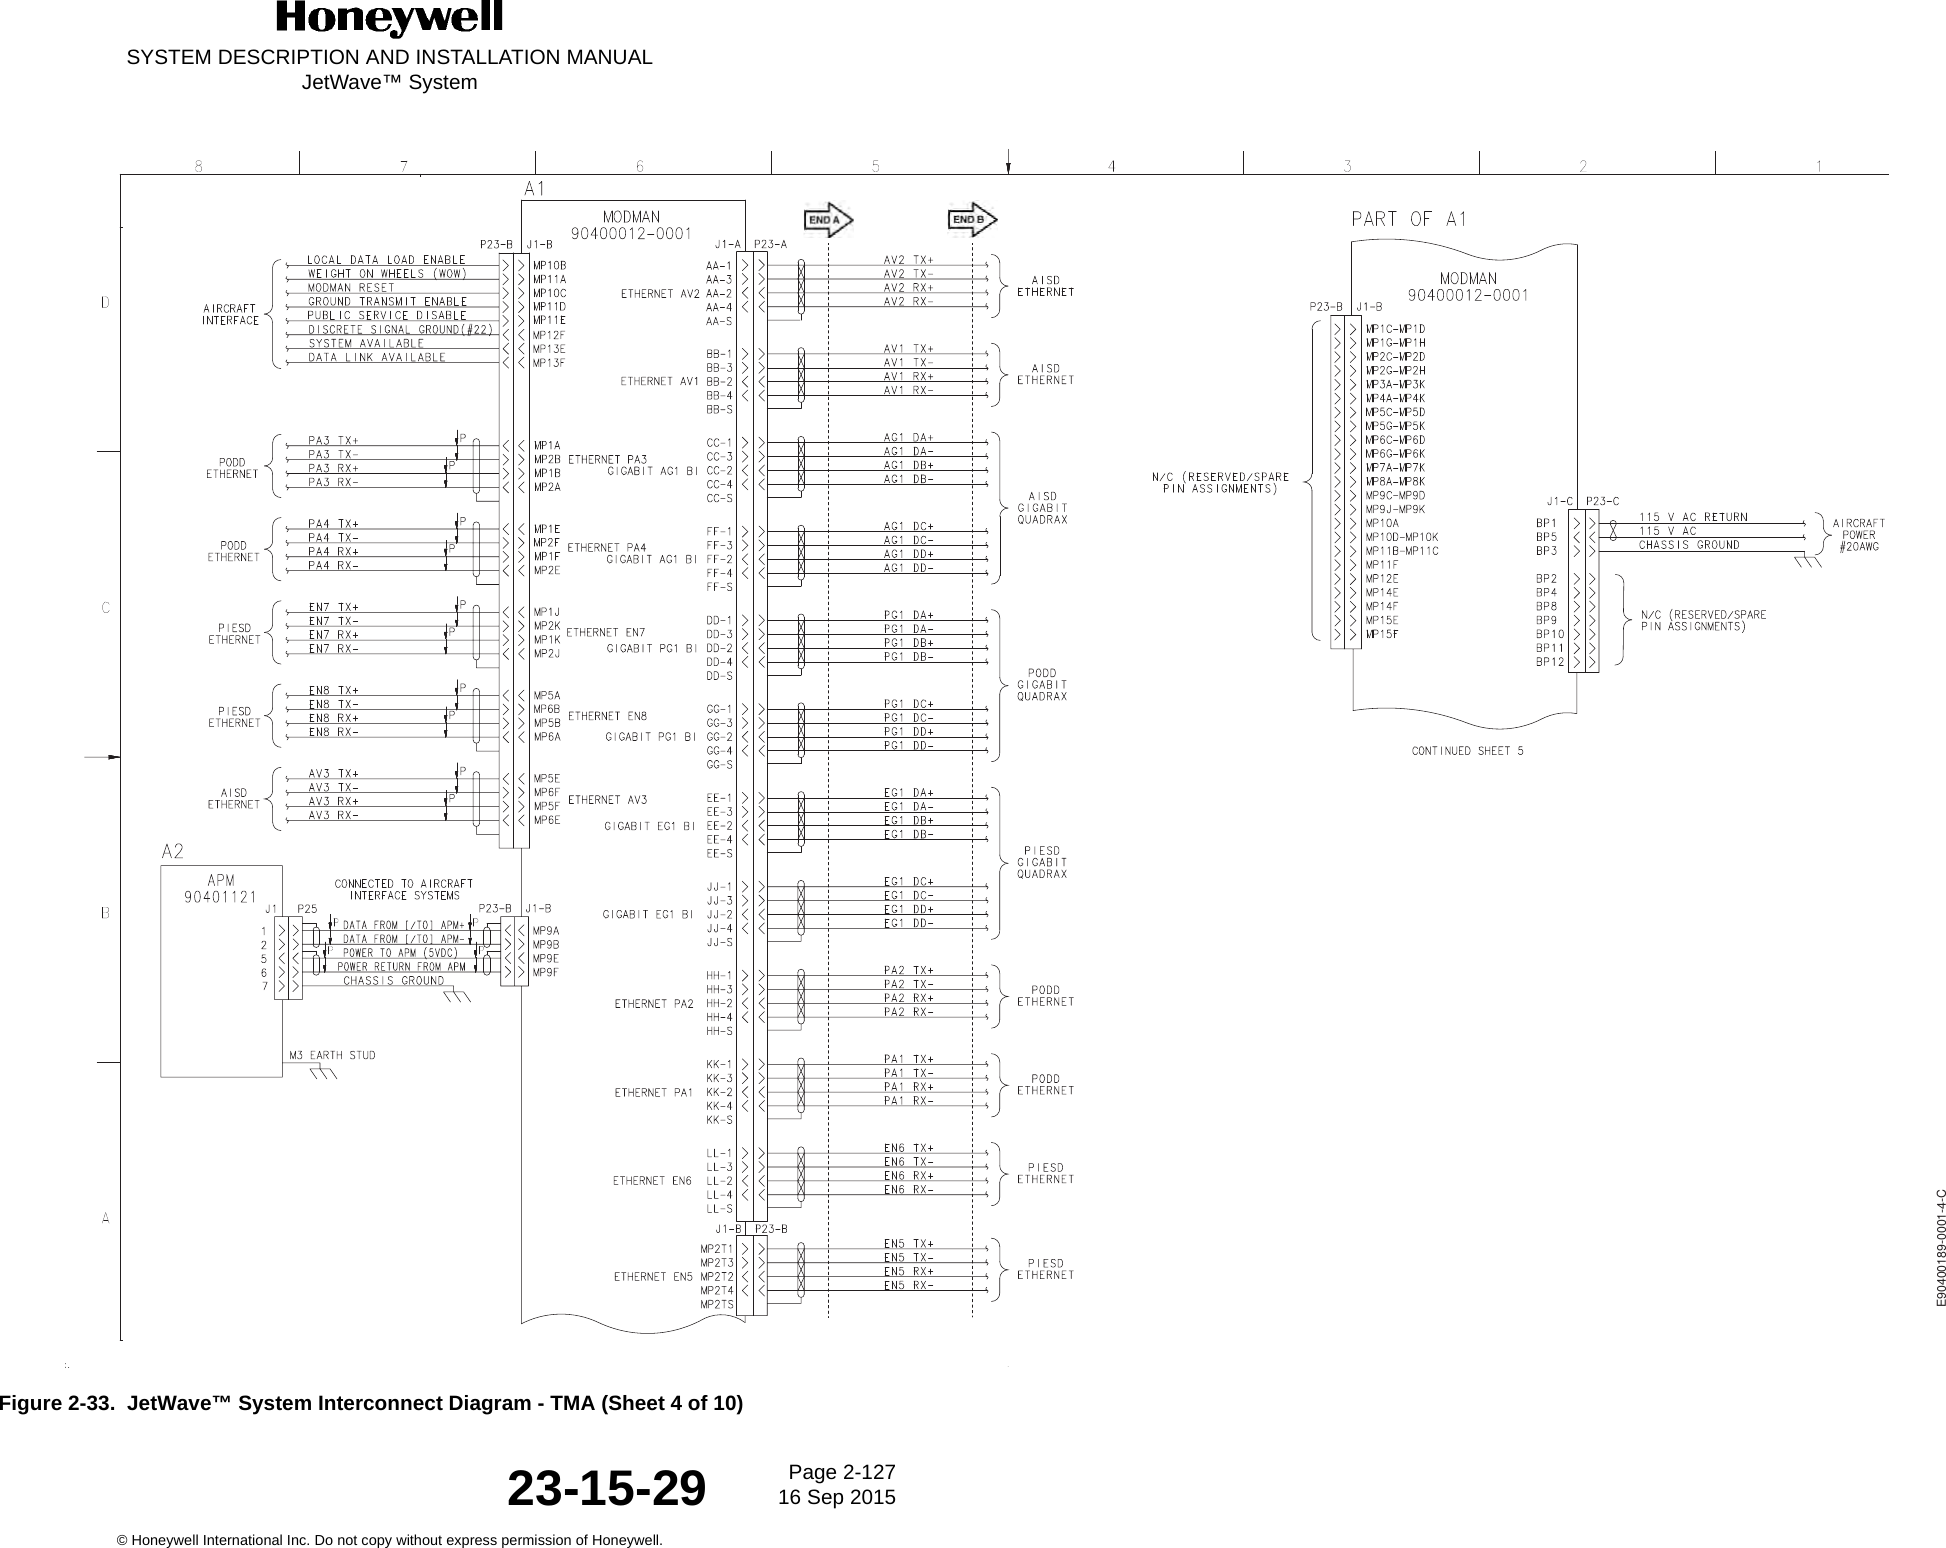 SYSTEM DESCRIPTION AND INSTALLATION MANUALJetWave™ SystemPage 2-127 16 Sep 2015© Honeywell International Inc. Do not copy without express permission of Honeywell.23-15-29Figure 2-33.  JetWave™ System Interconnect Diagram - TMA (Sheet 4 of 10)E90400189-0001-4-C